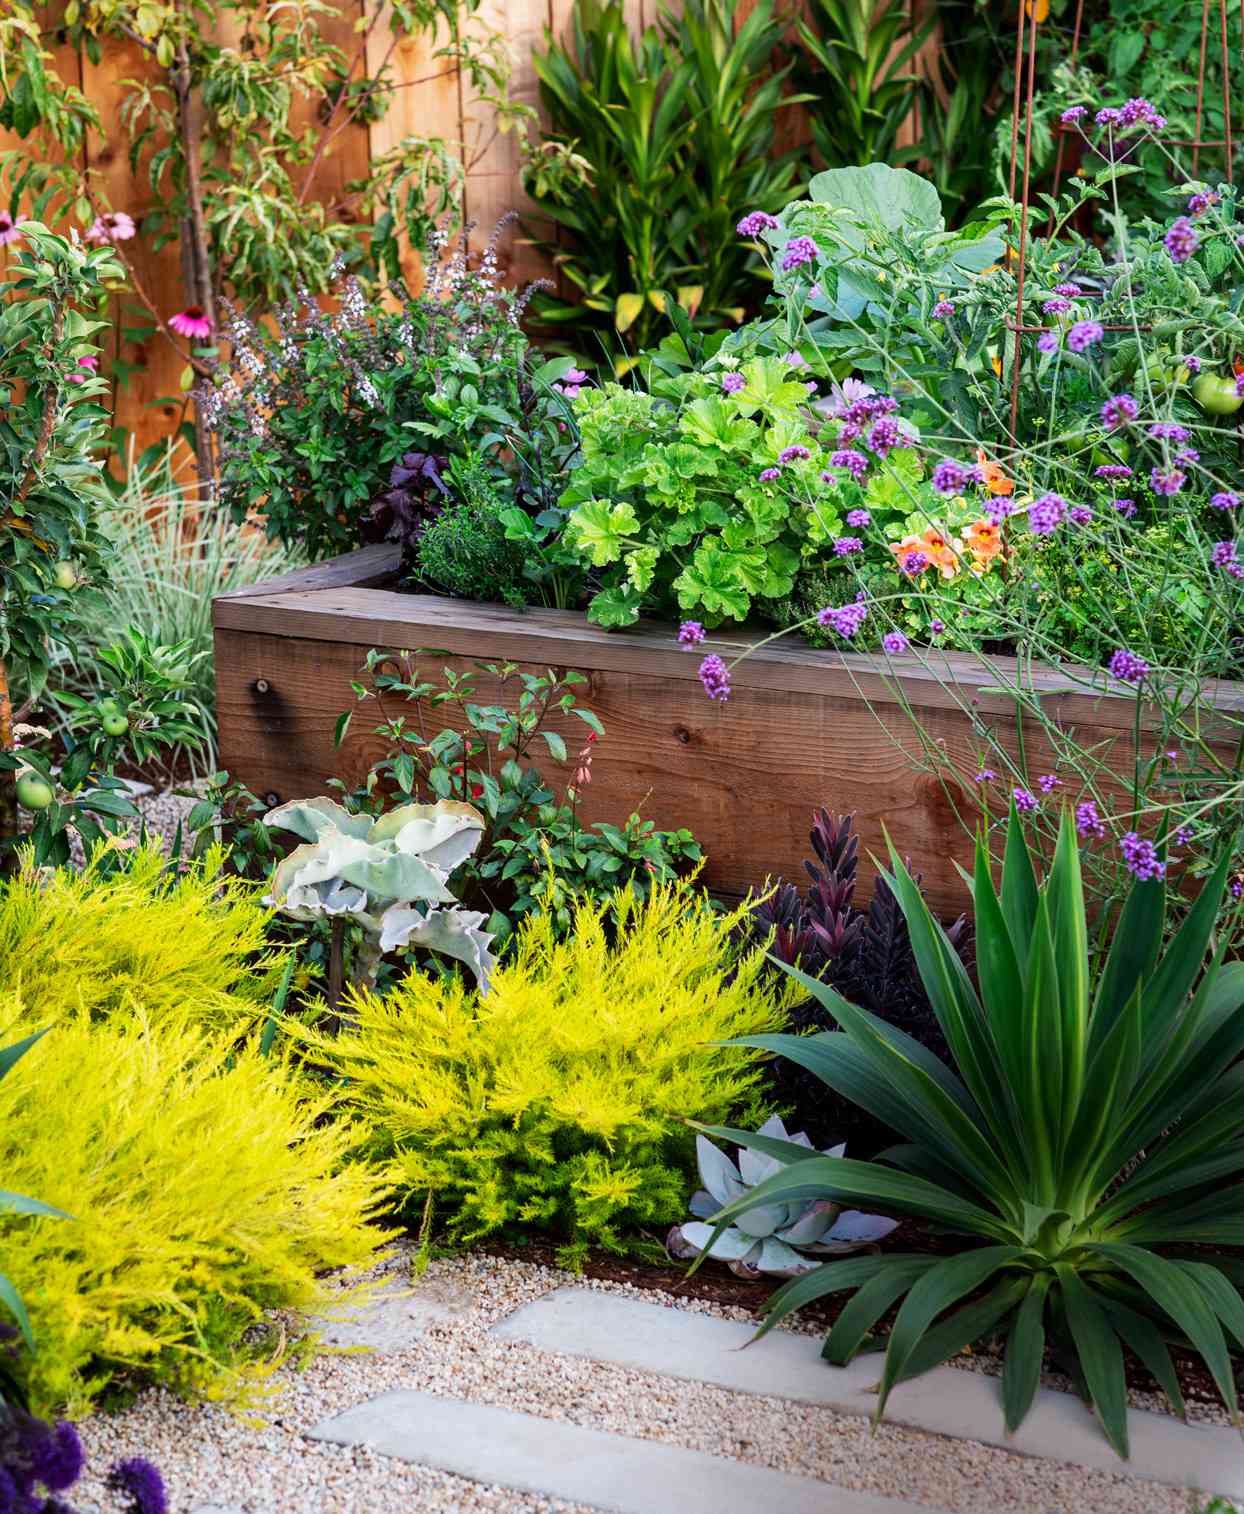 Give Your Landscape a Seasonal Makeover